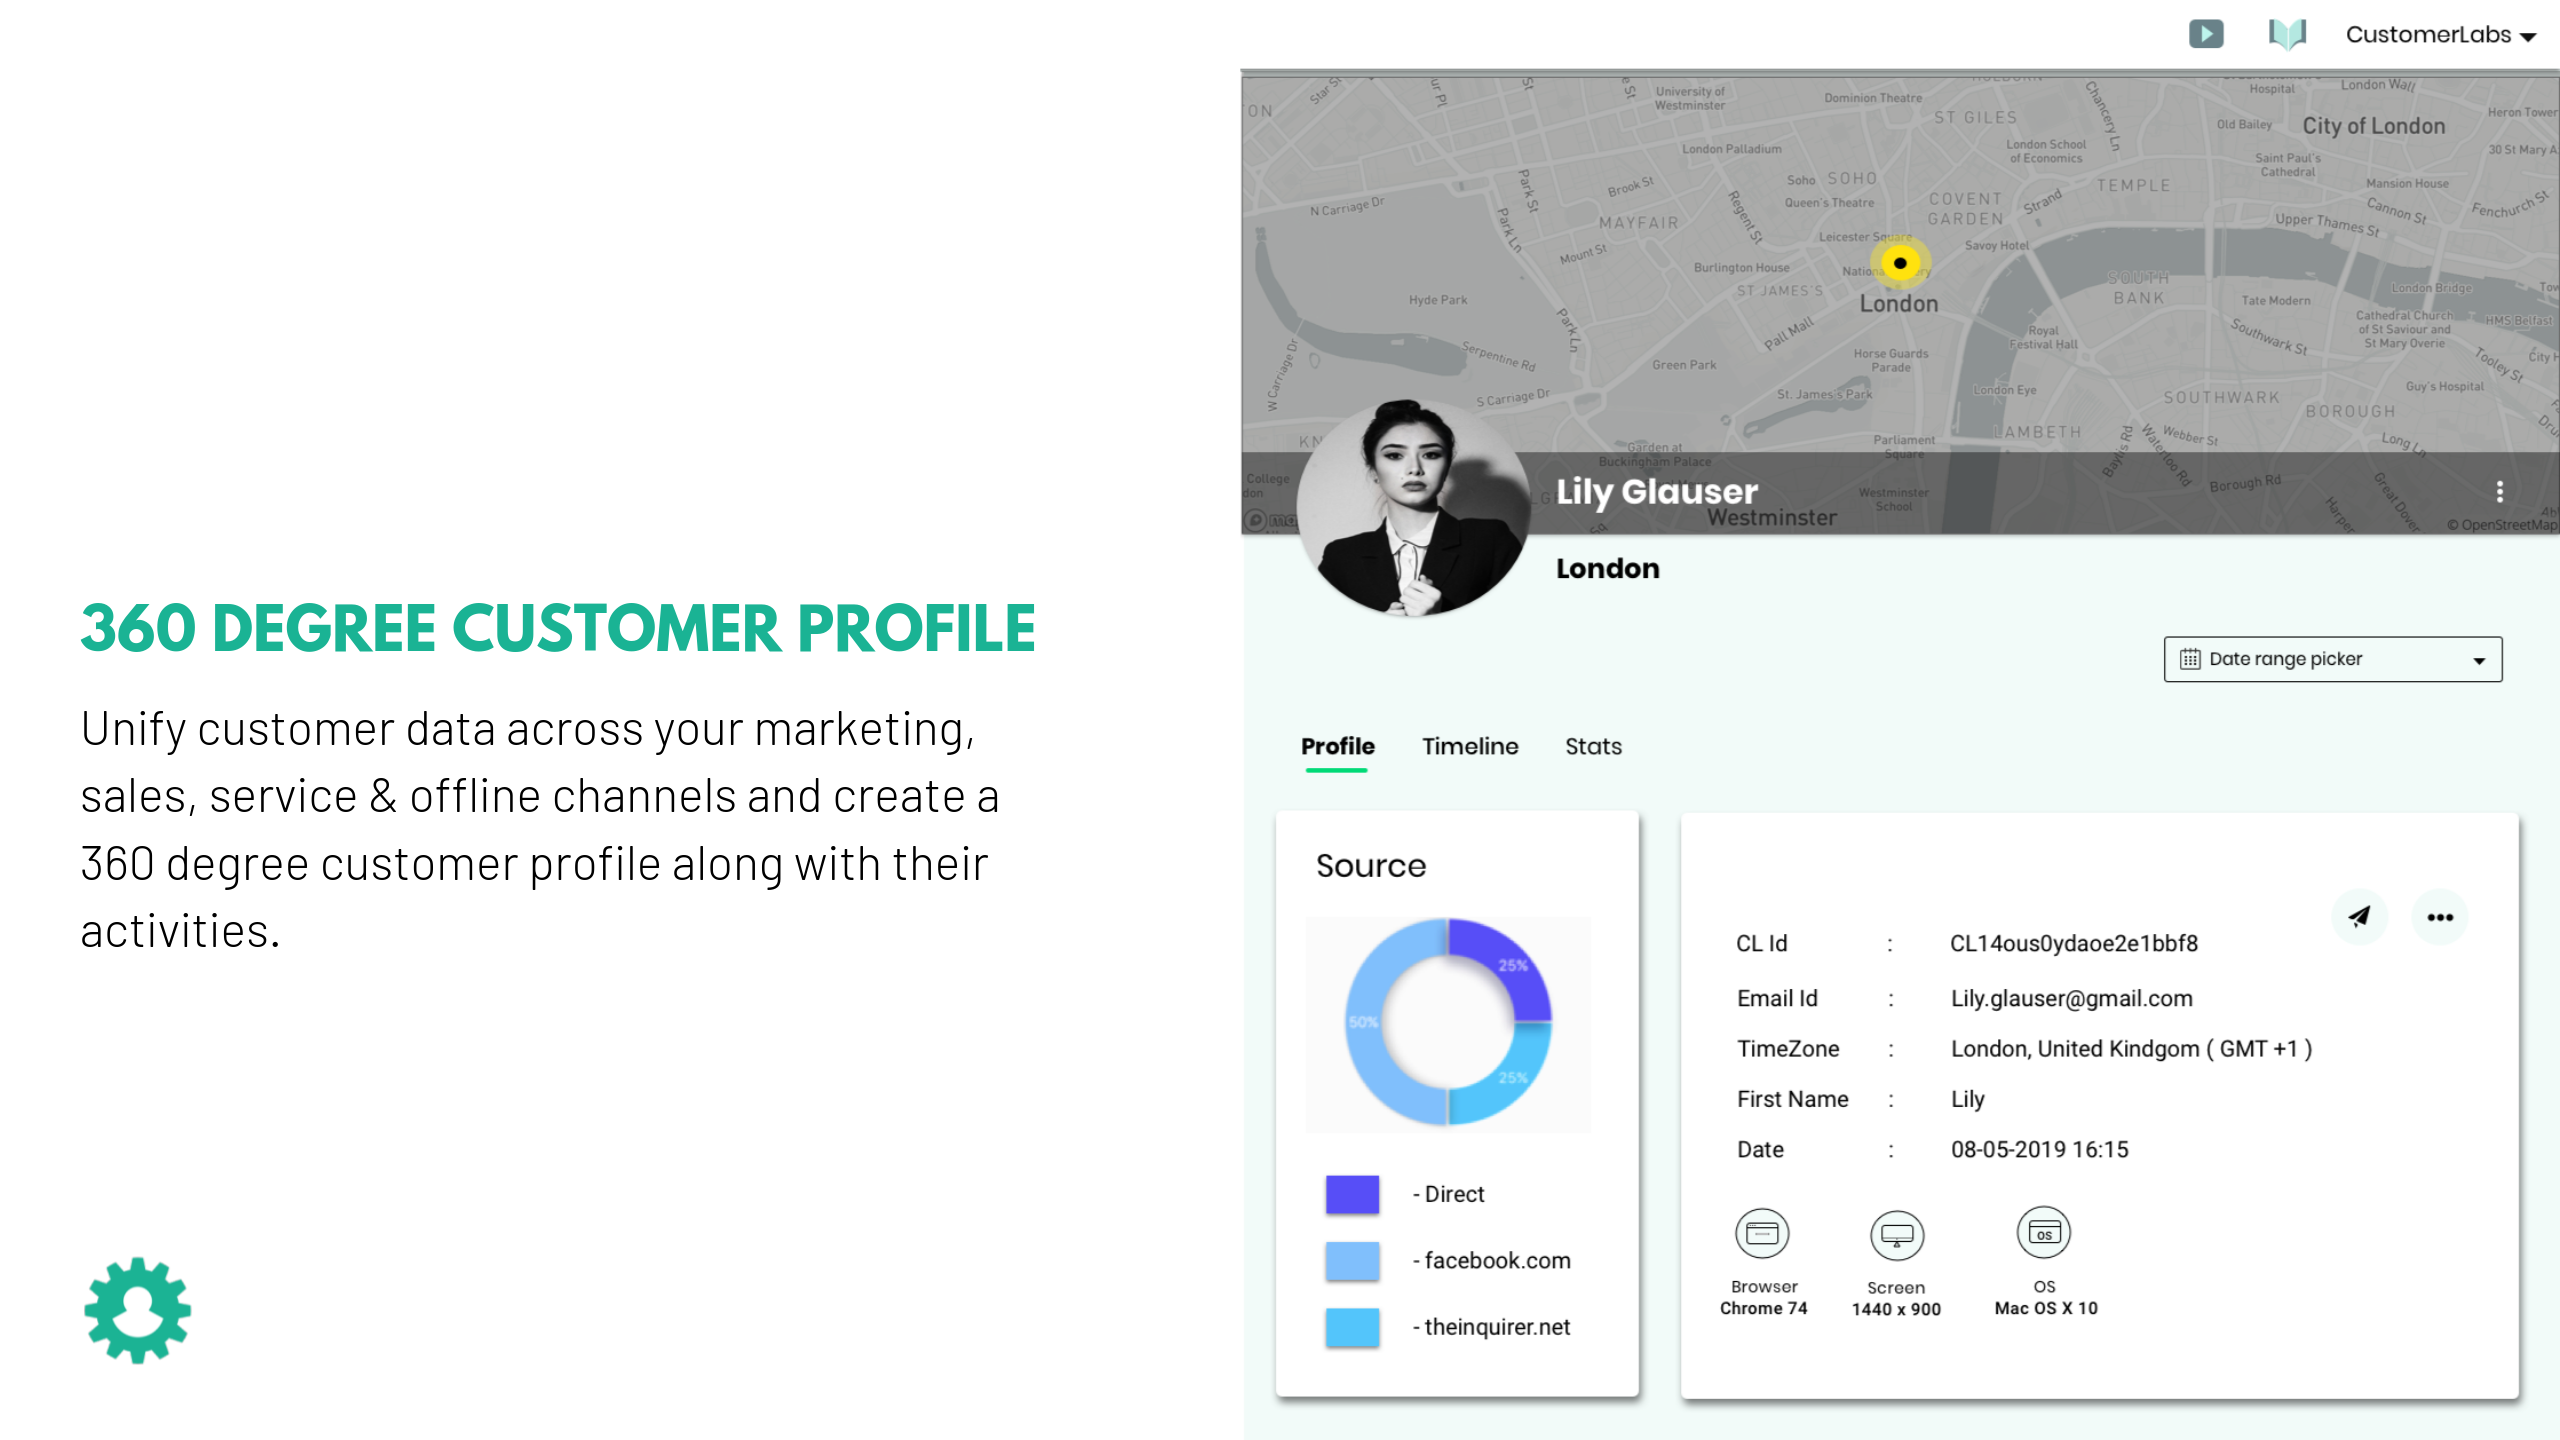 CustomerLabs CDP Software - Identify anonymous users and map their behavior across channels to create a 360 degree customer profile